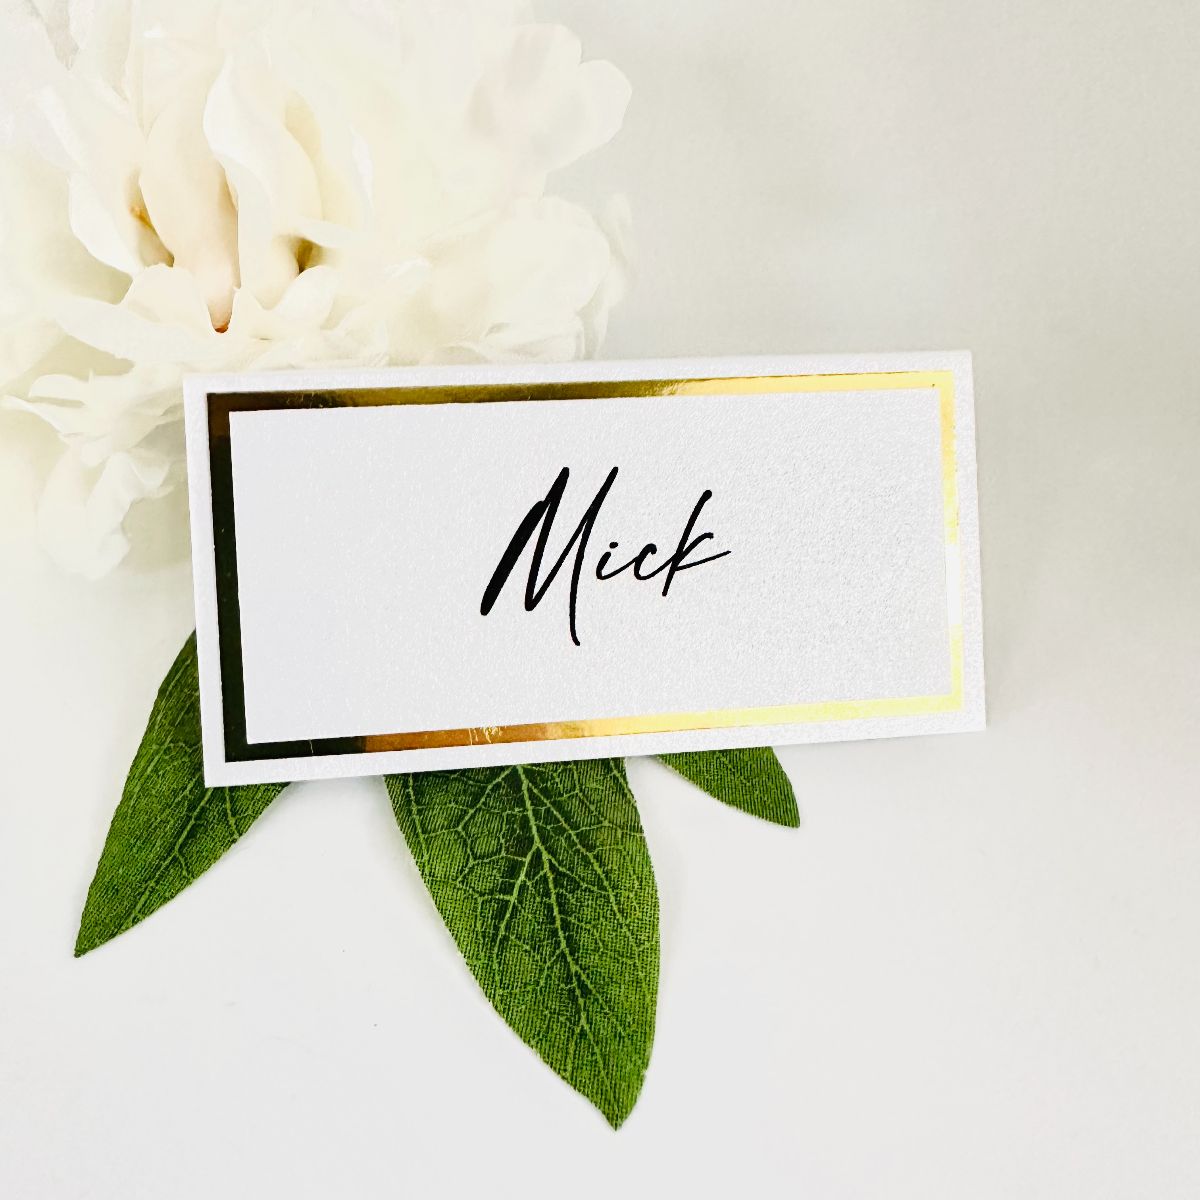 Name place card